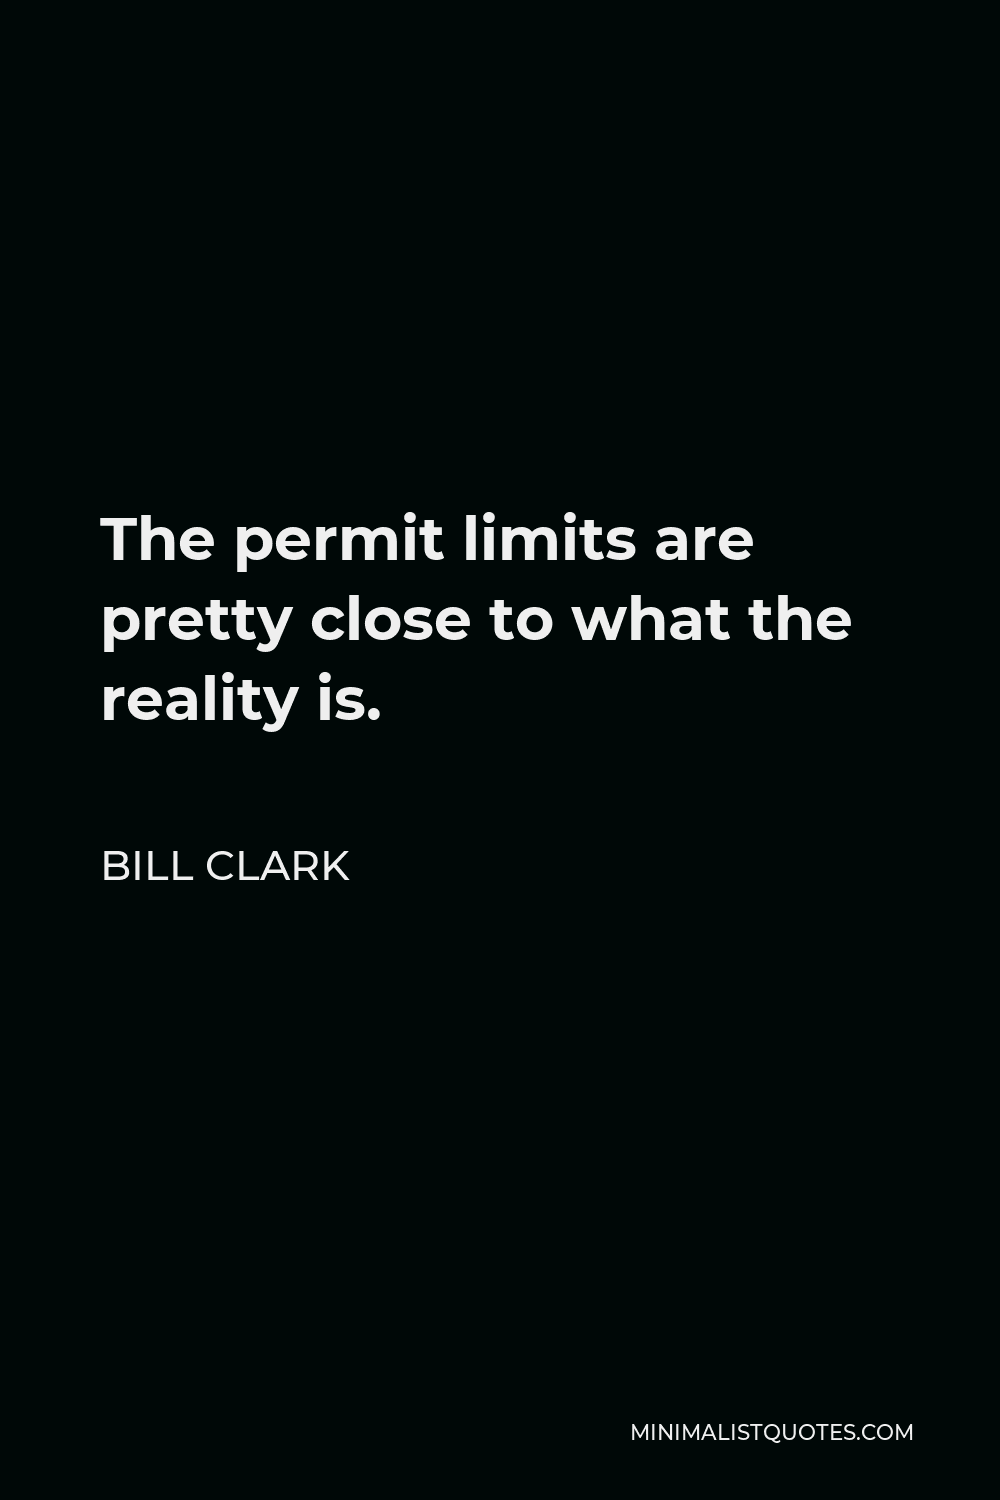 Bill Clark Quote - The permit limits are pretty close to what the reality is.